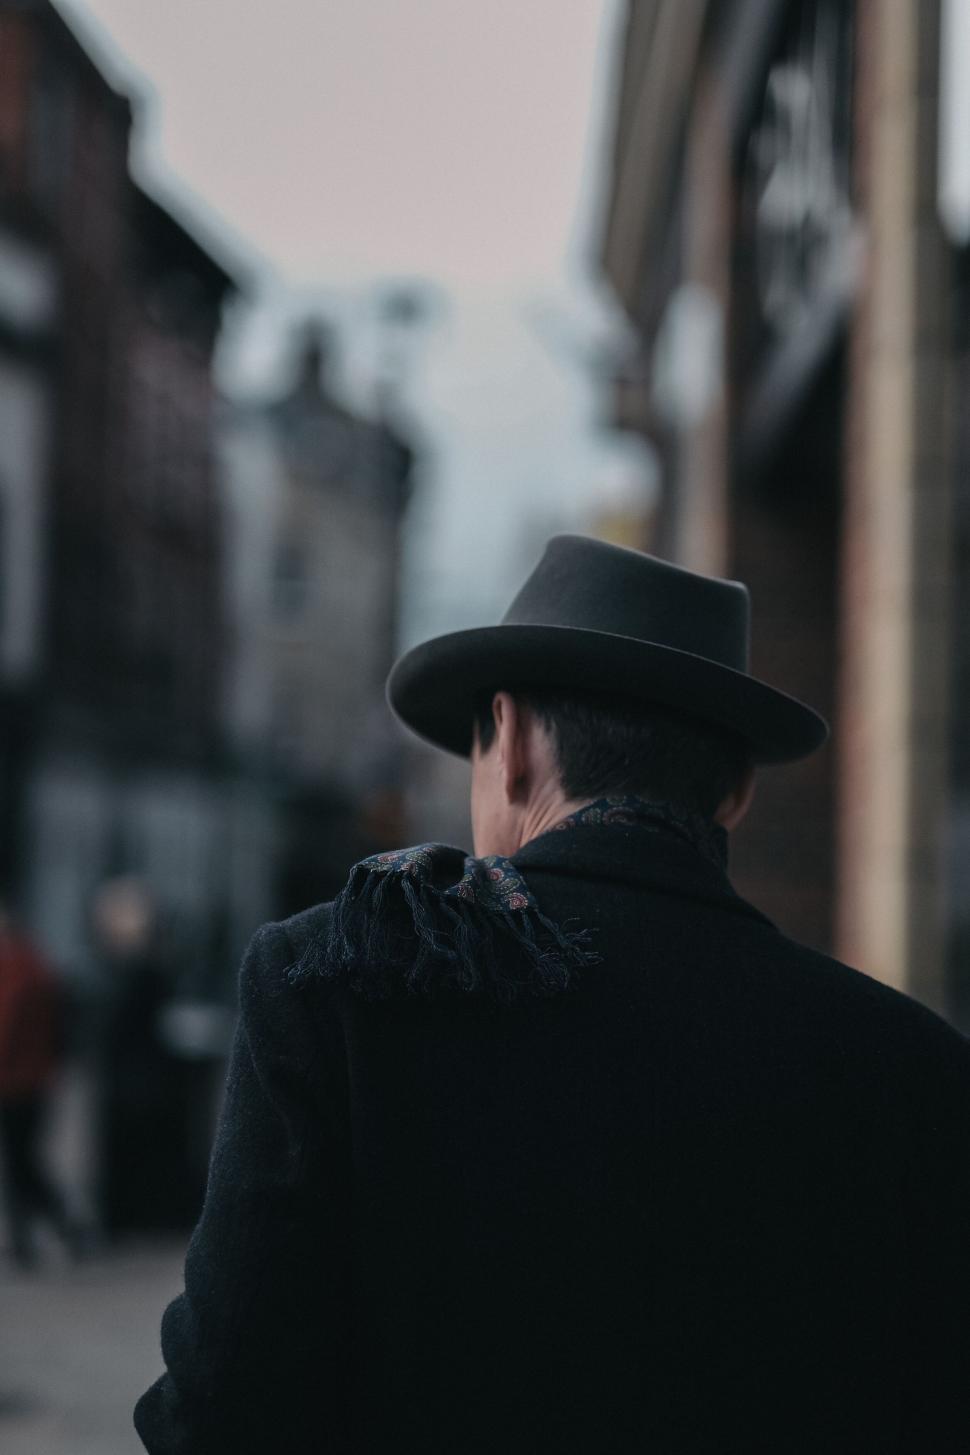 Free Image of Man in a hat walking in a European city 